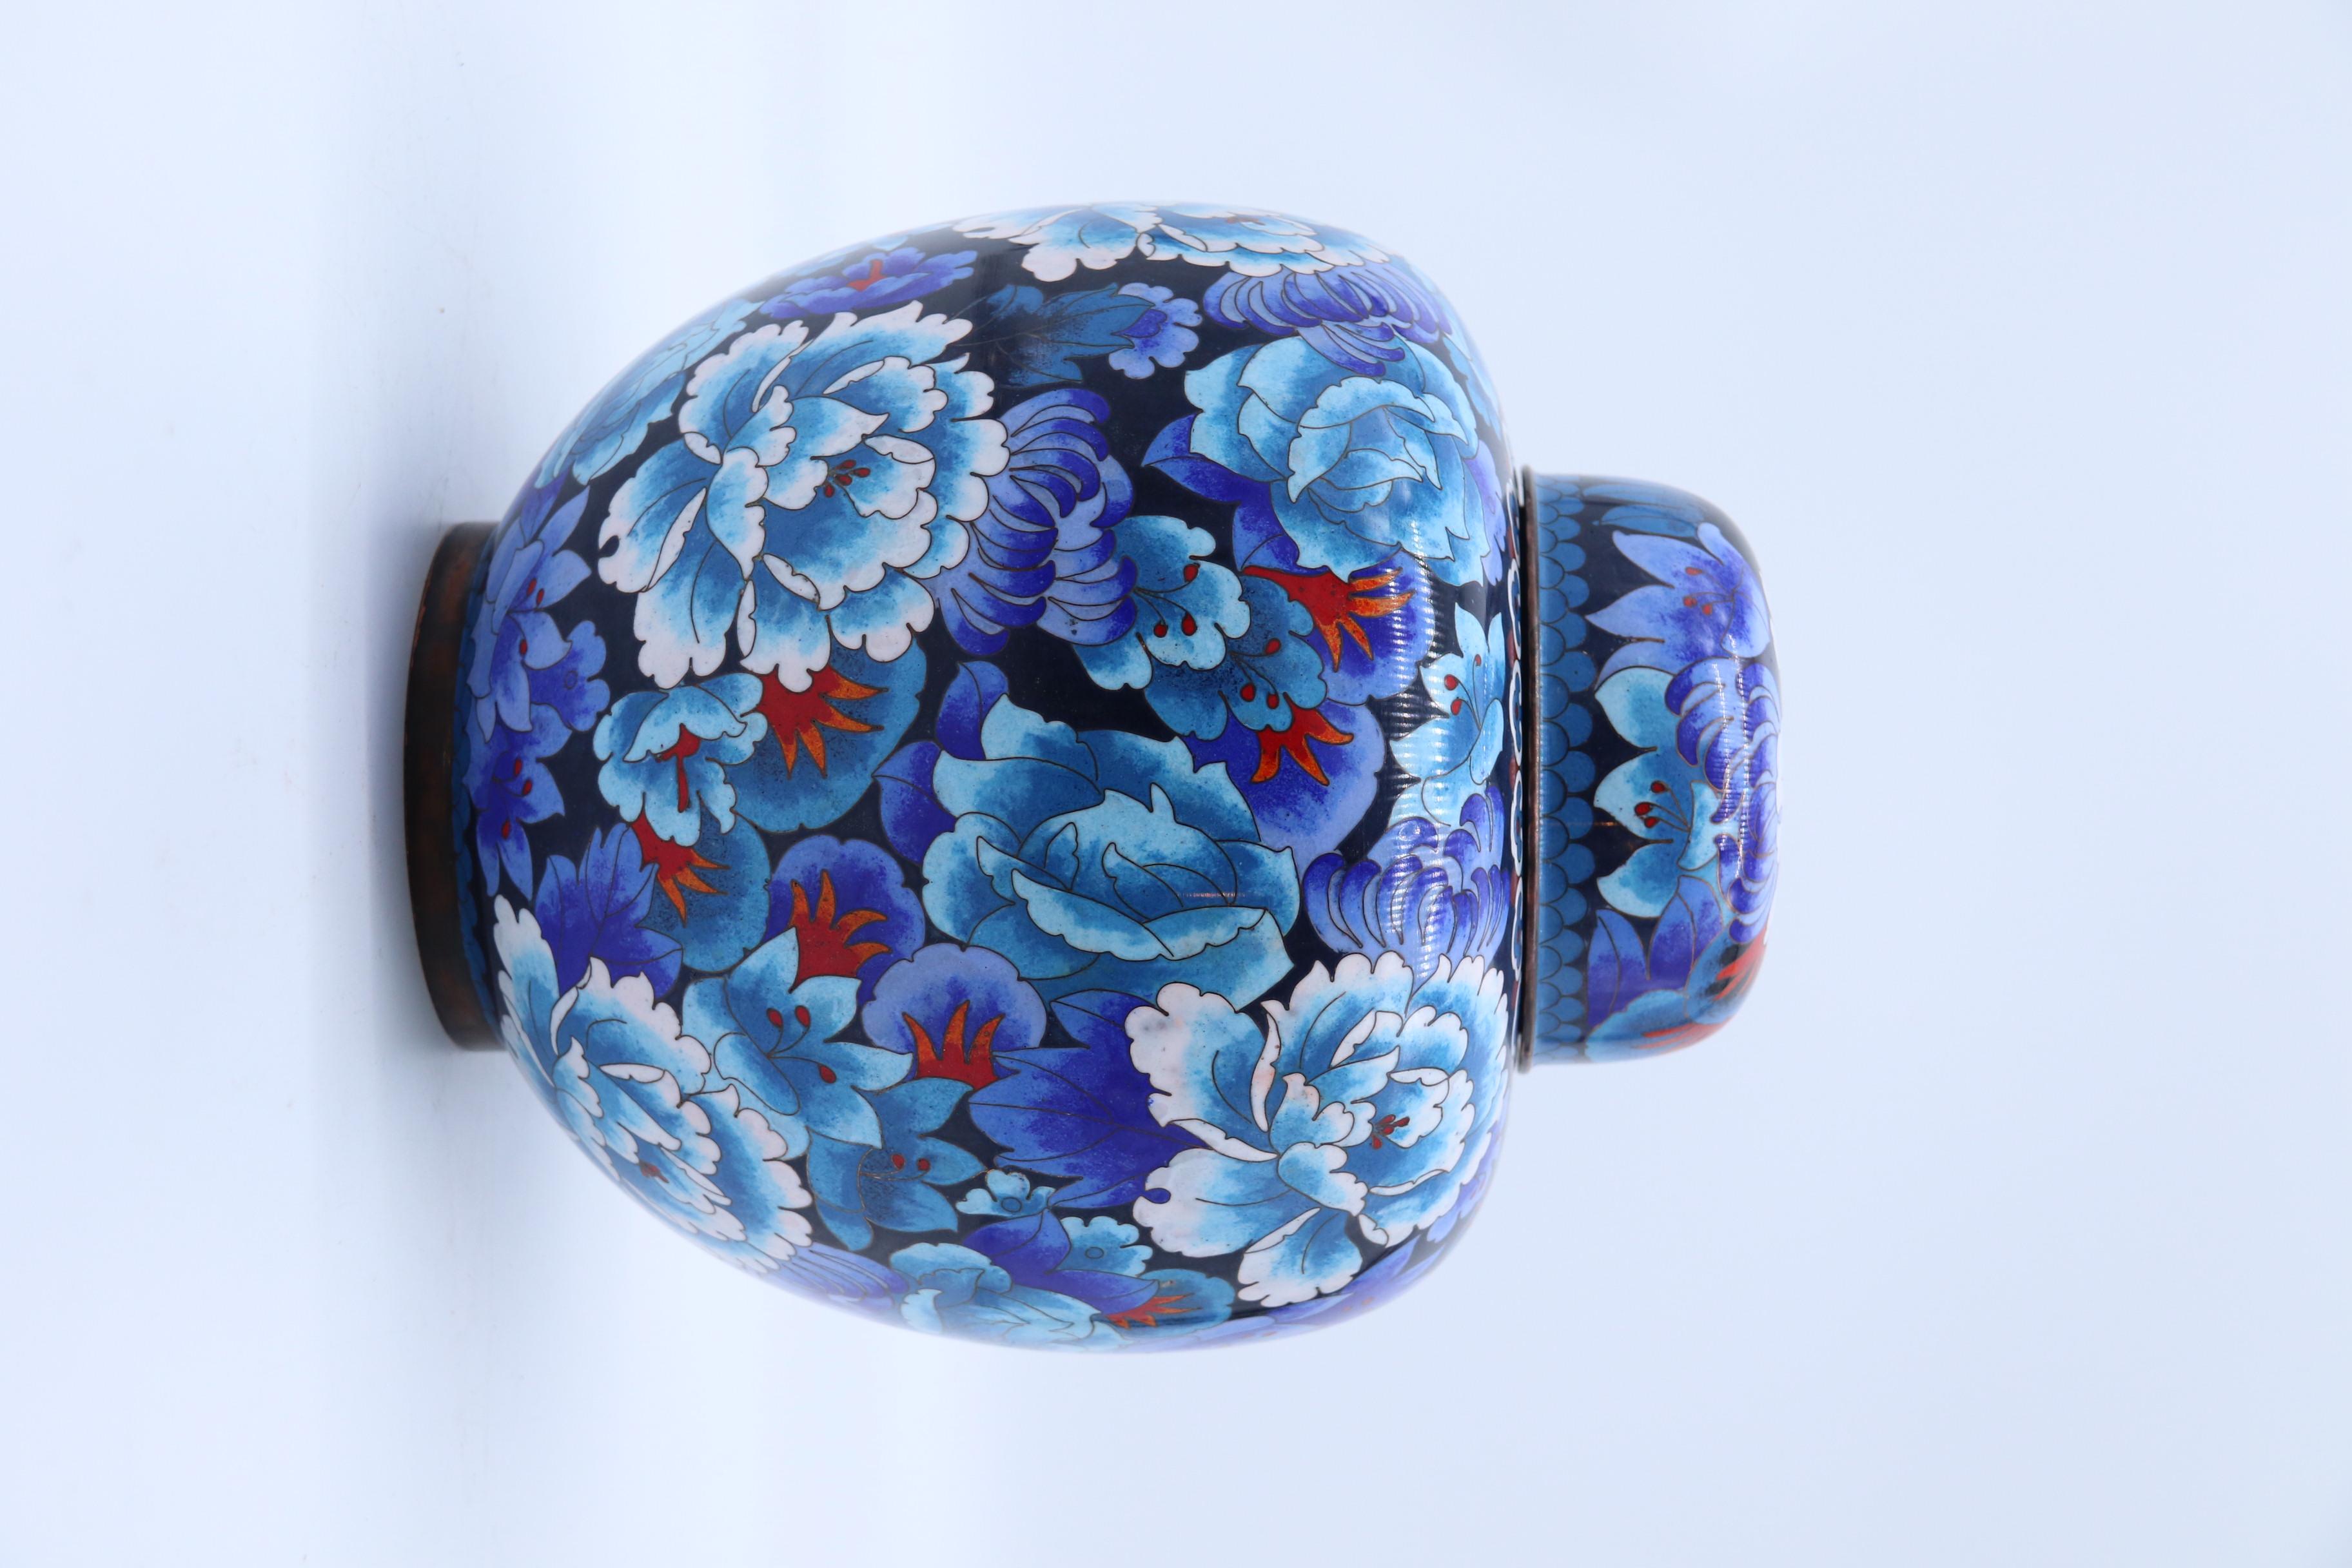 This most eye catching fine large cloisonné lidded ginger jar dates to the mid 20th century and is a true work of art. It is completely covered in a multitude of exotic flowers mainly peonies in rich vibrant colours over a dark ground. The